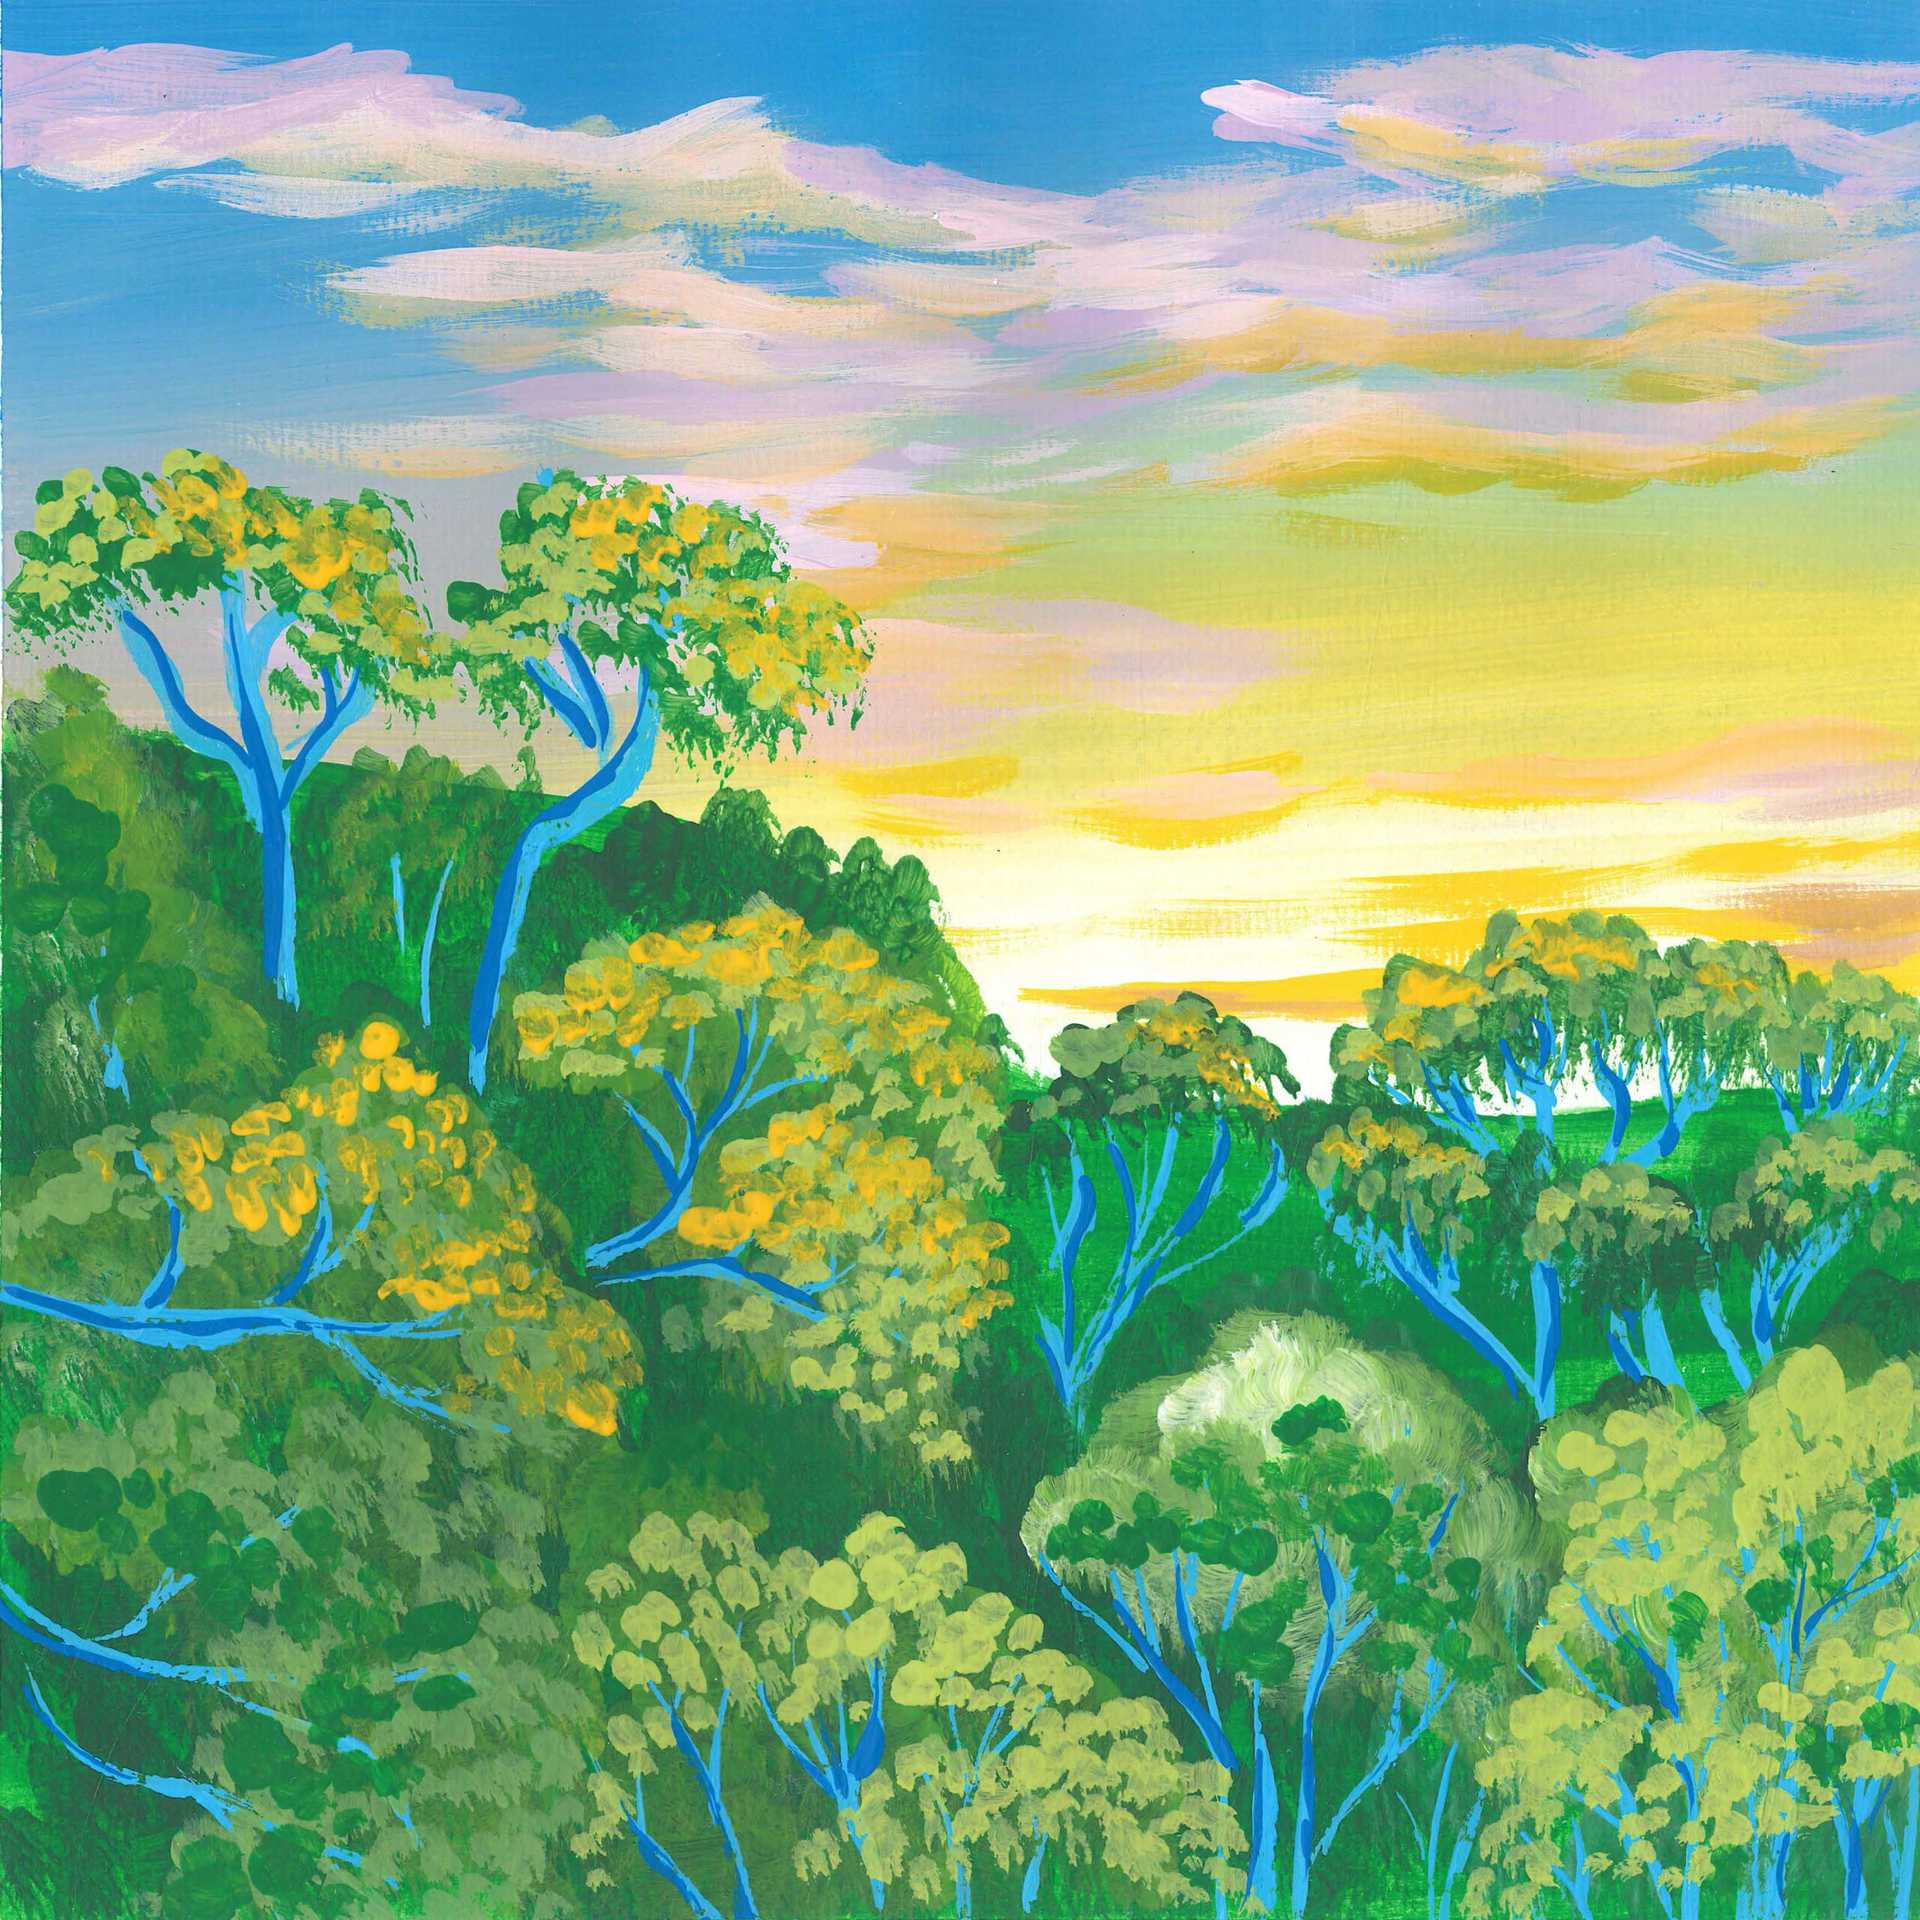 Dawn in the Amazonian Rainforest - nature landscape painting - earth.fm